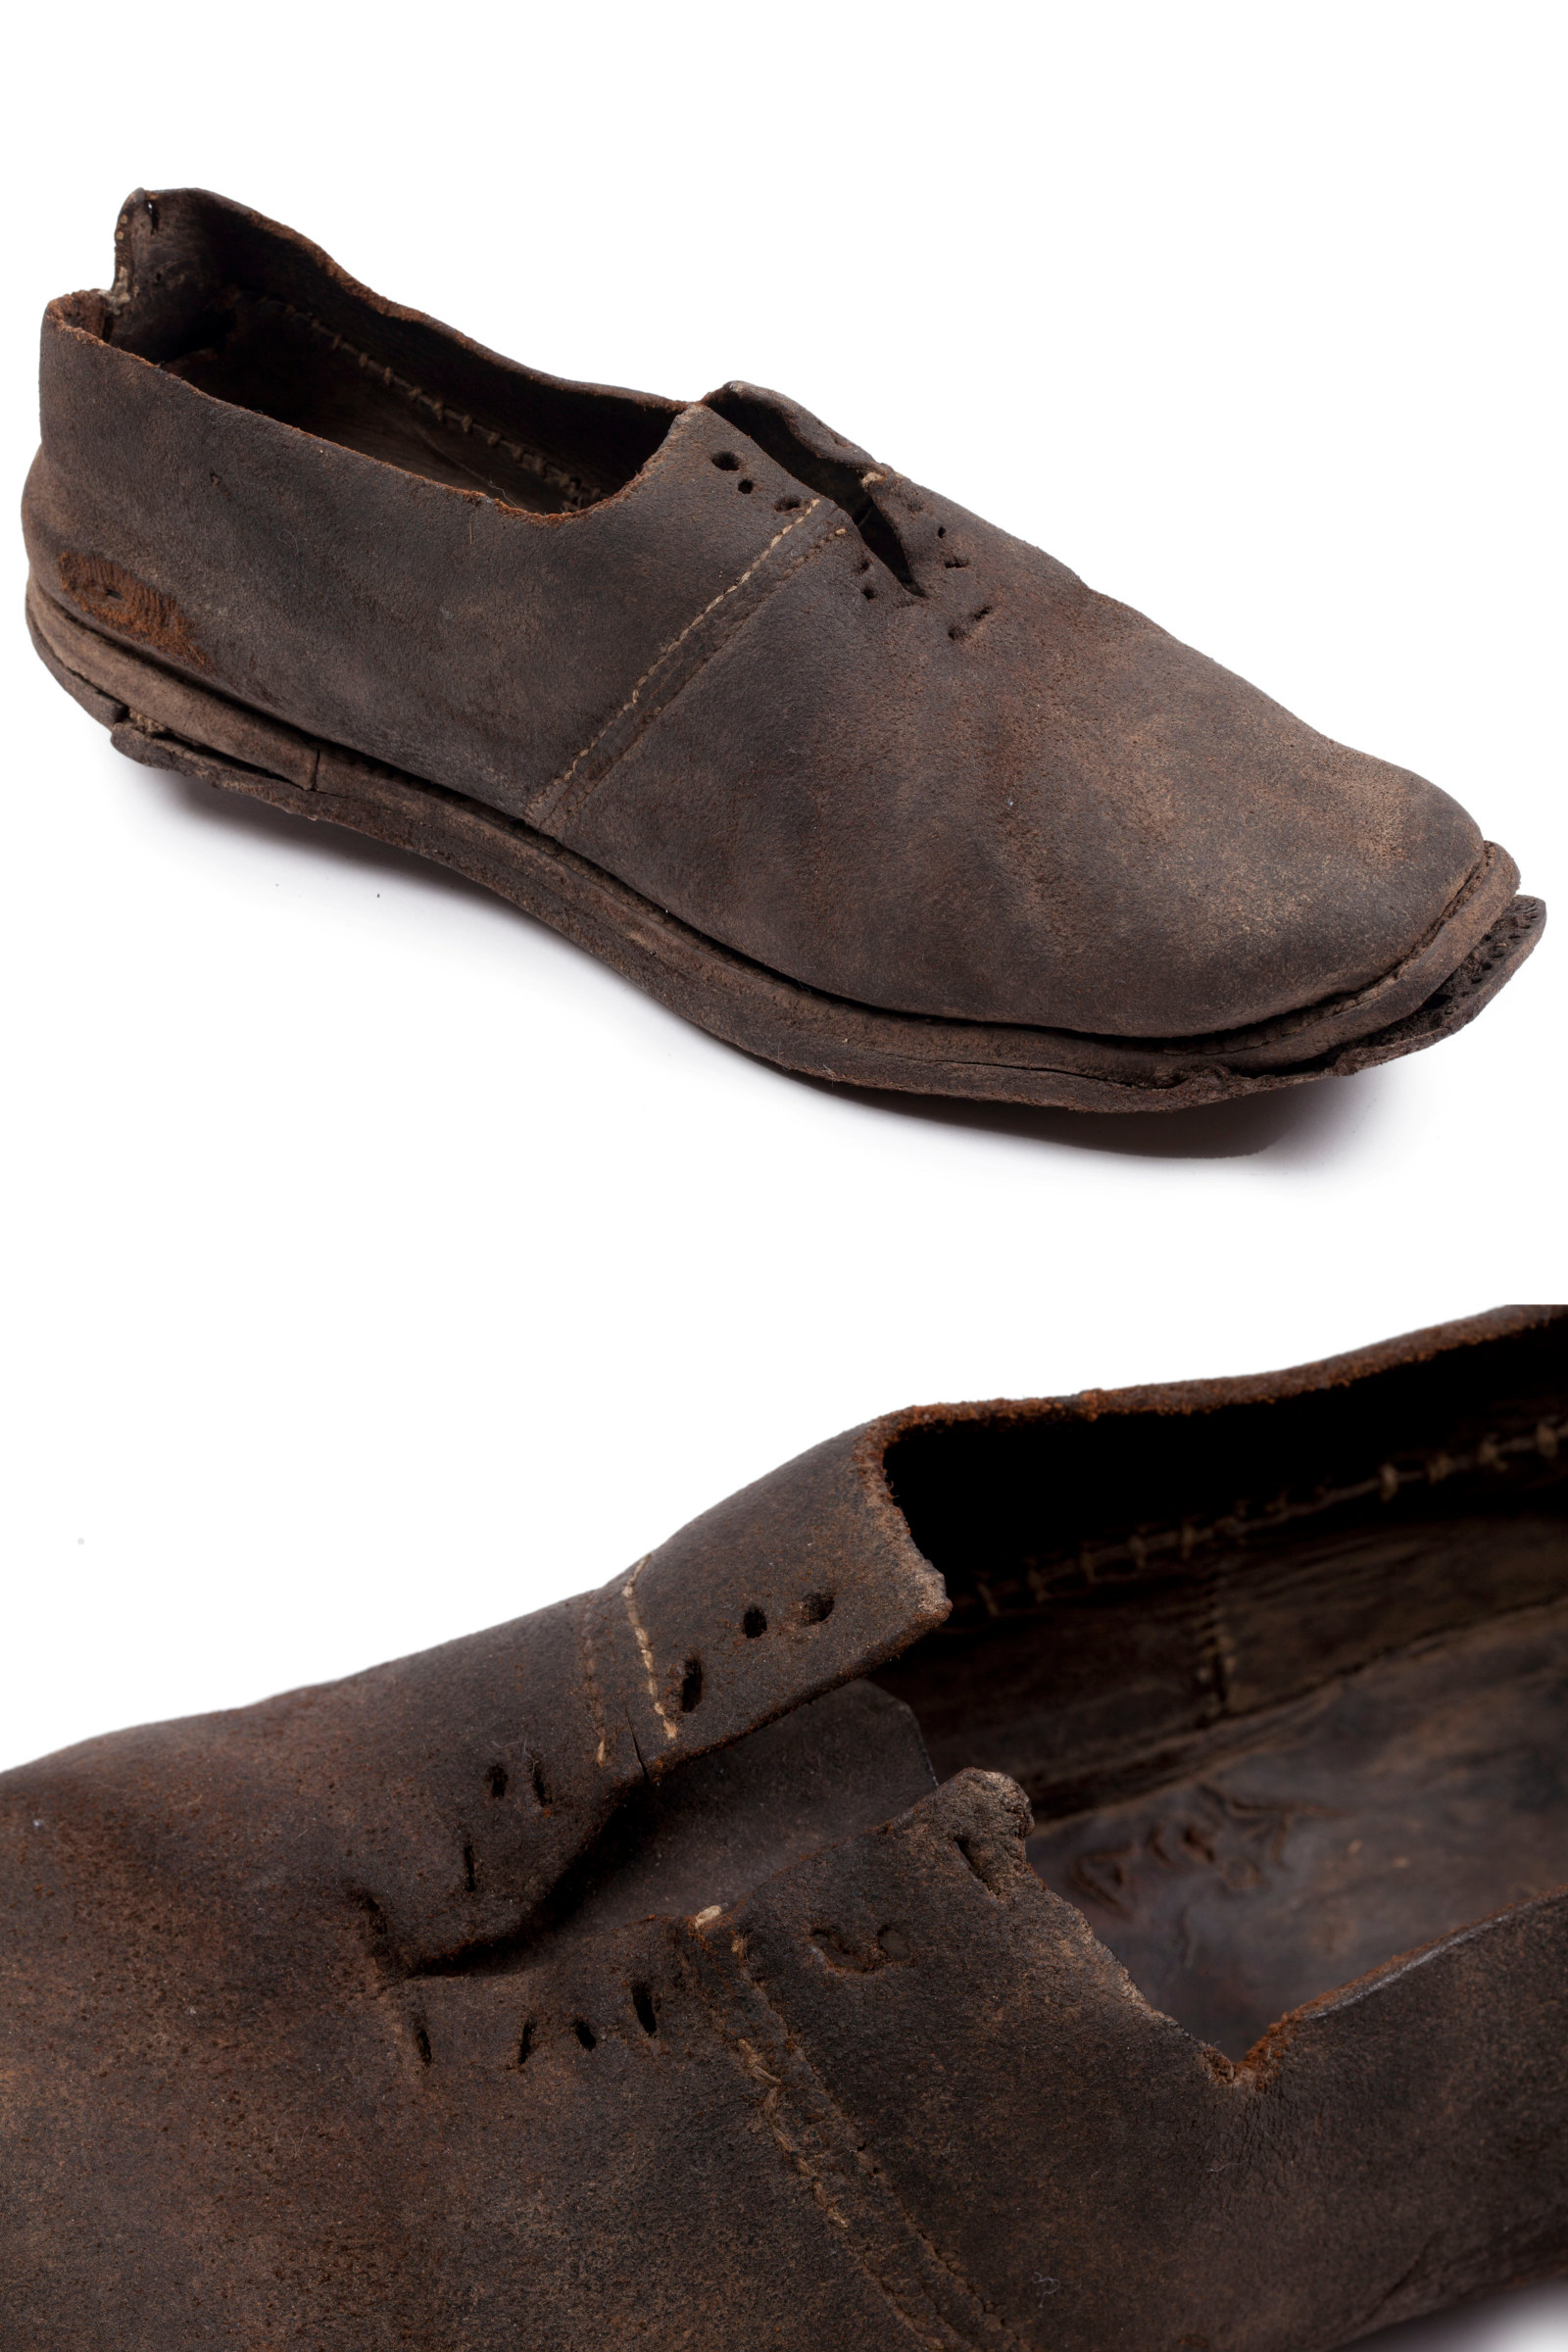 Handmade convict shoe, HPB archaeology collection